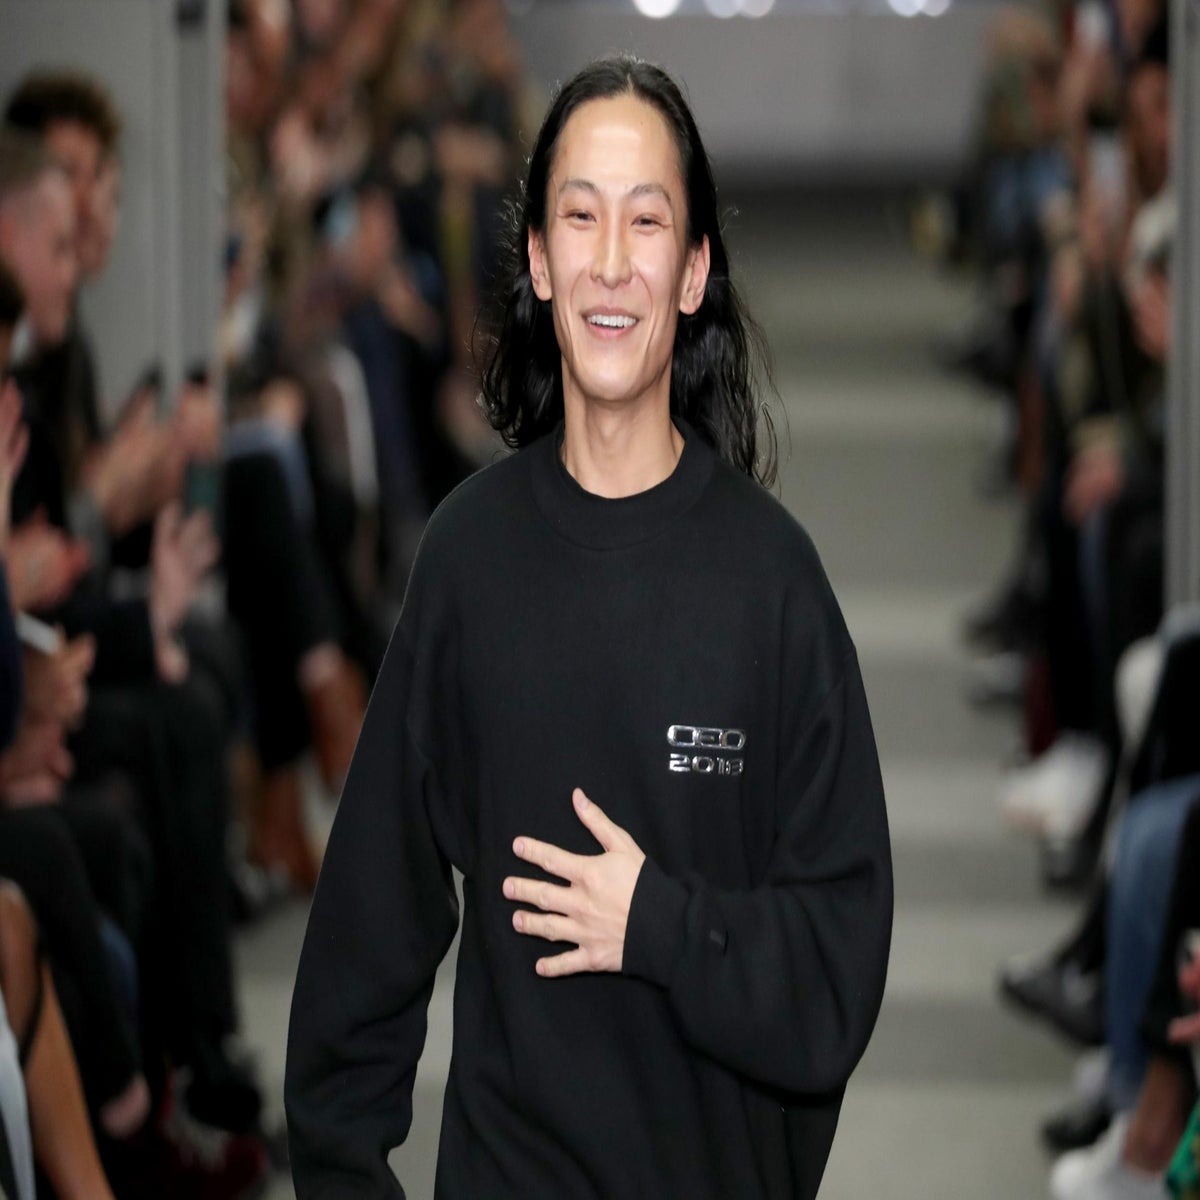 https://static.independent.co.uk/s3fs-public/thumbnails/image/2018/10/11/12/alexander-wang.jpg?width=1200&height=1200&fit=crop